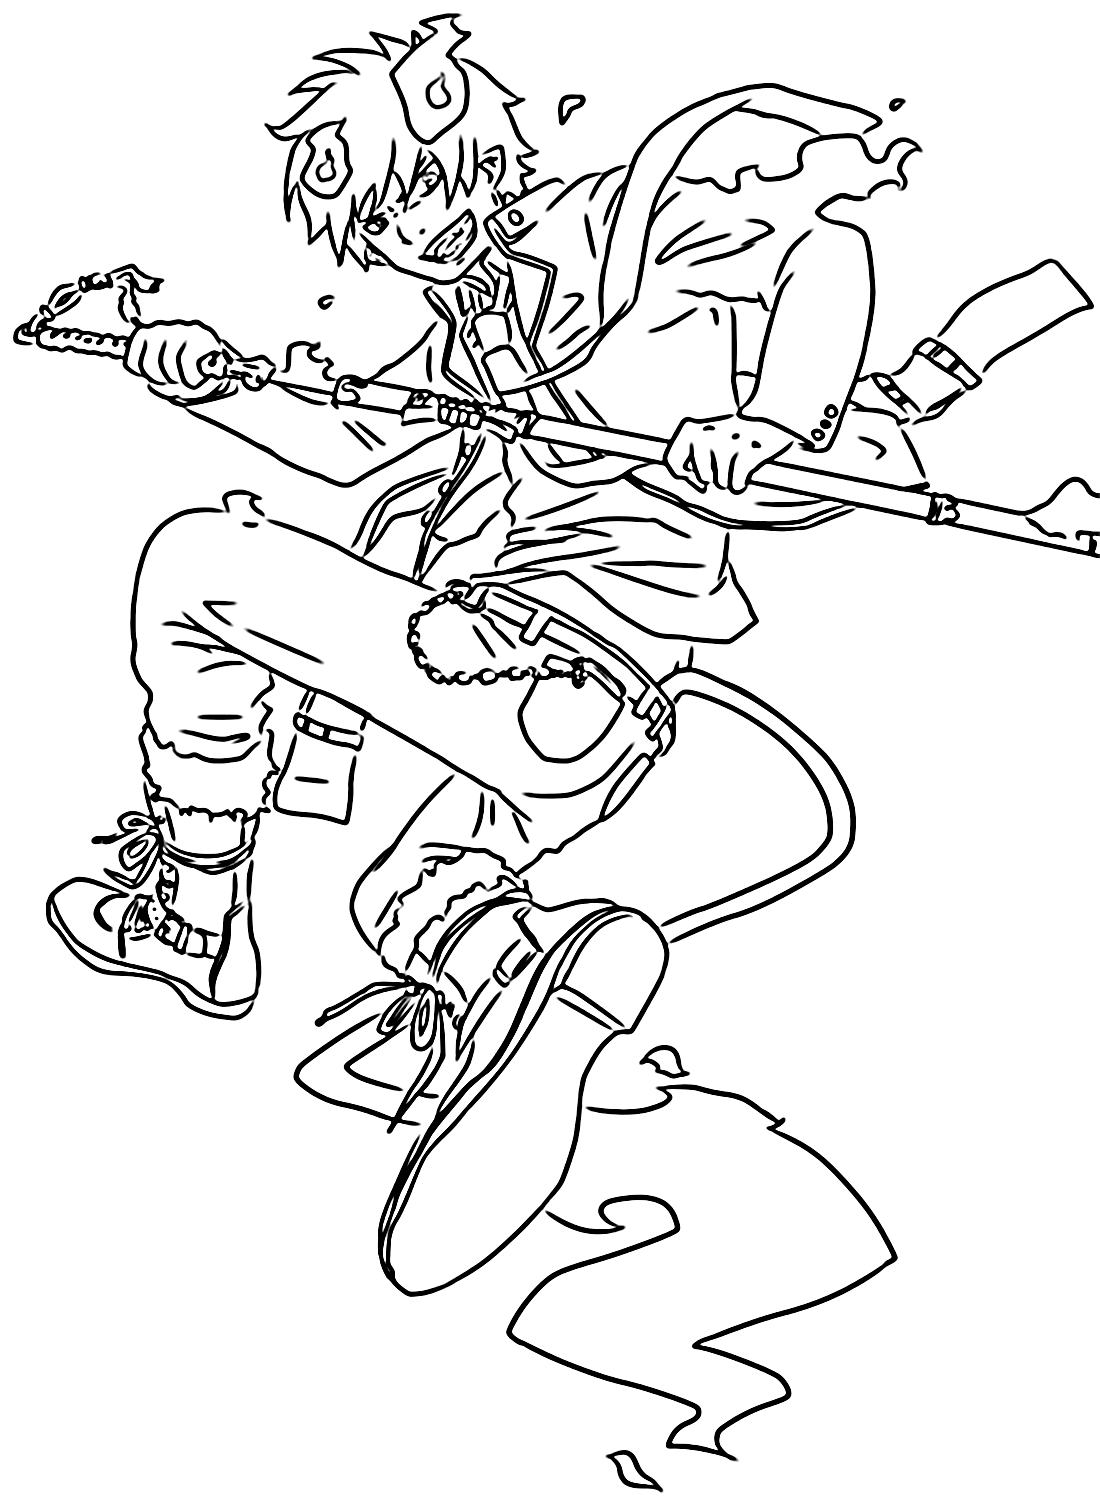 Rin Okumura Image to Color